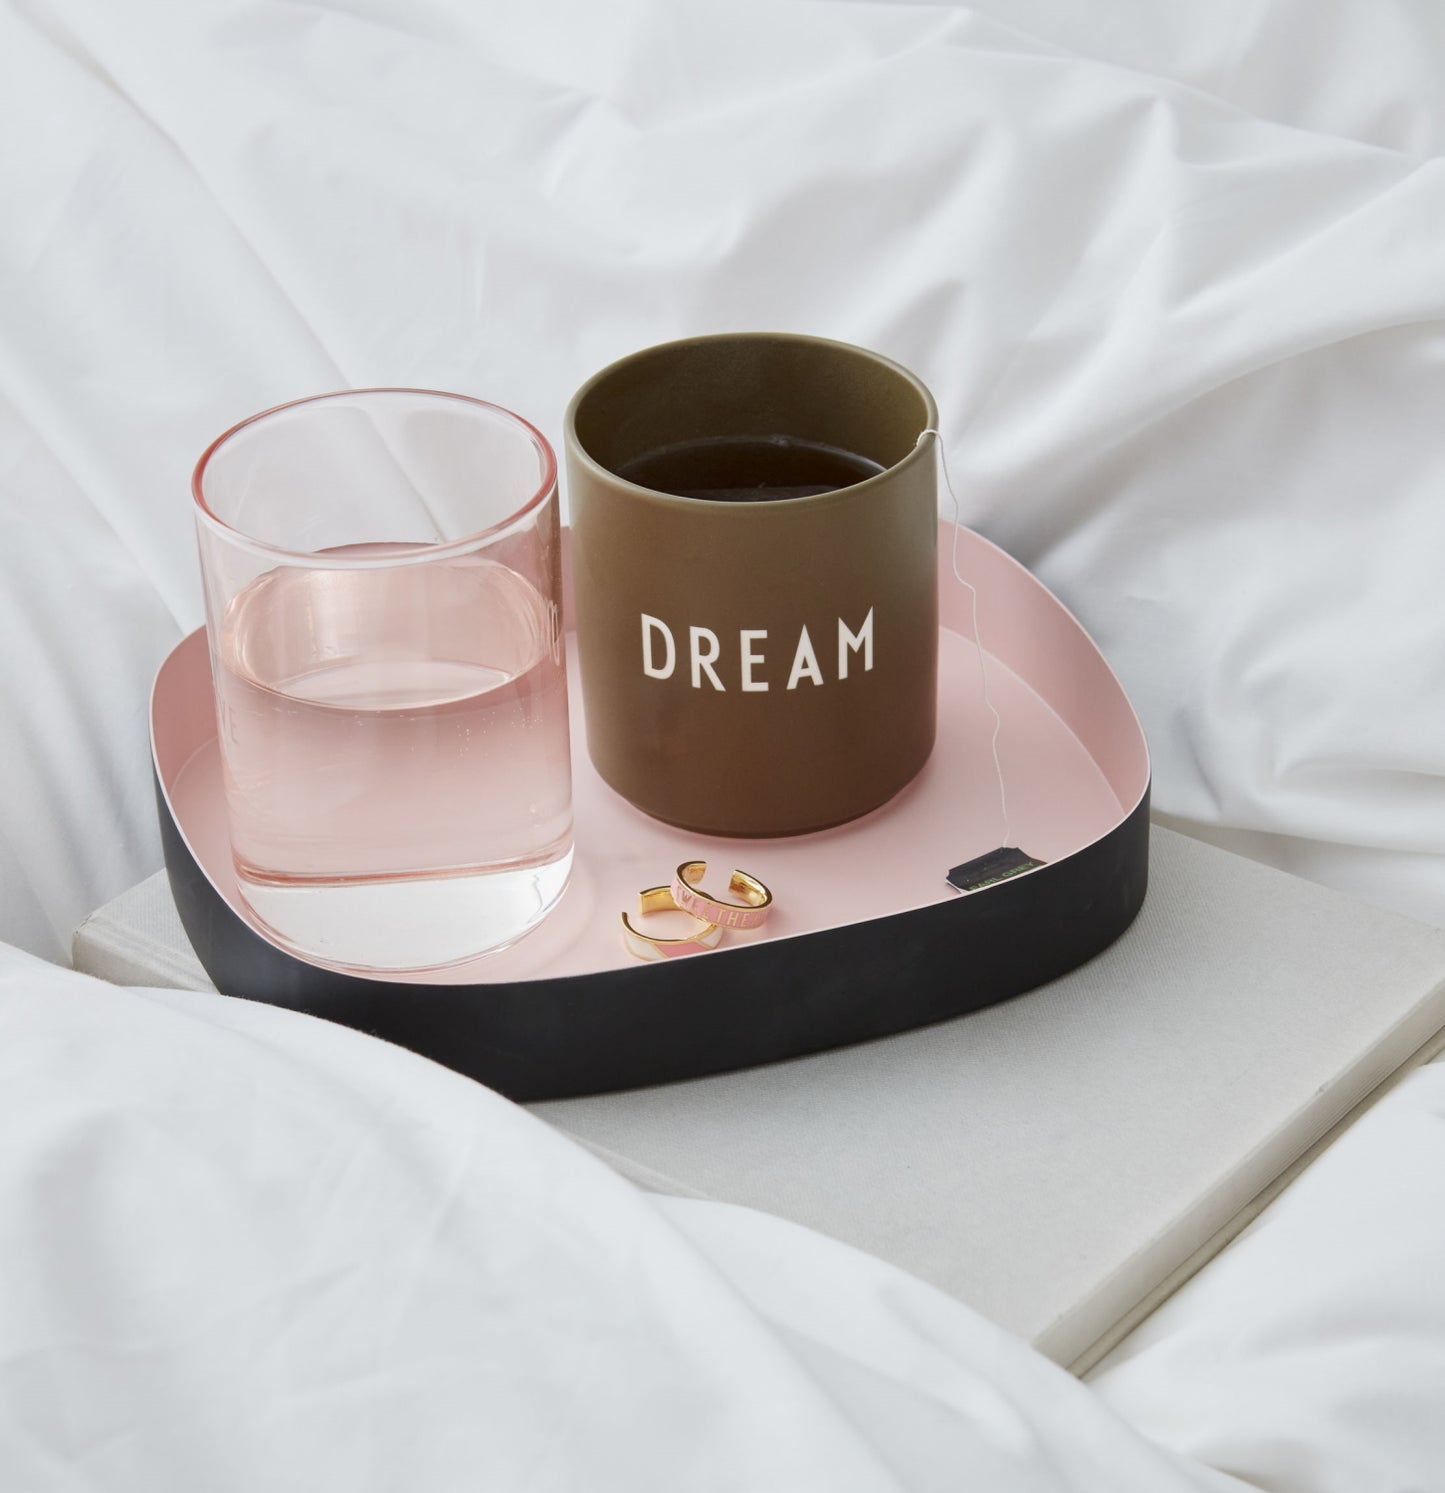 Favourite Cup Dream olive